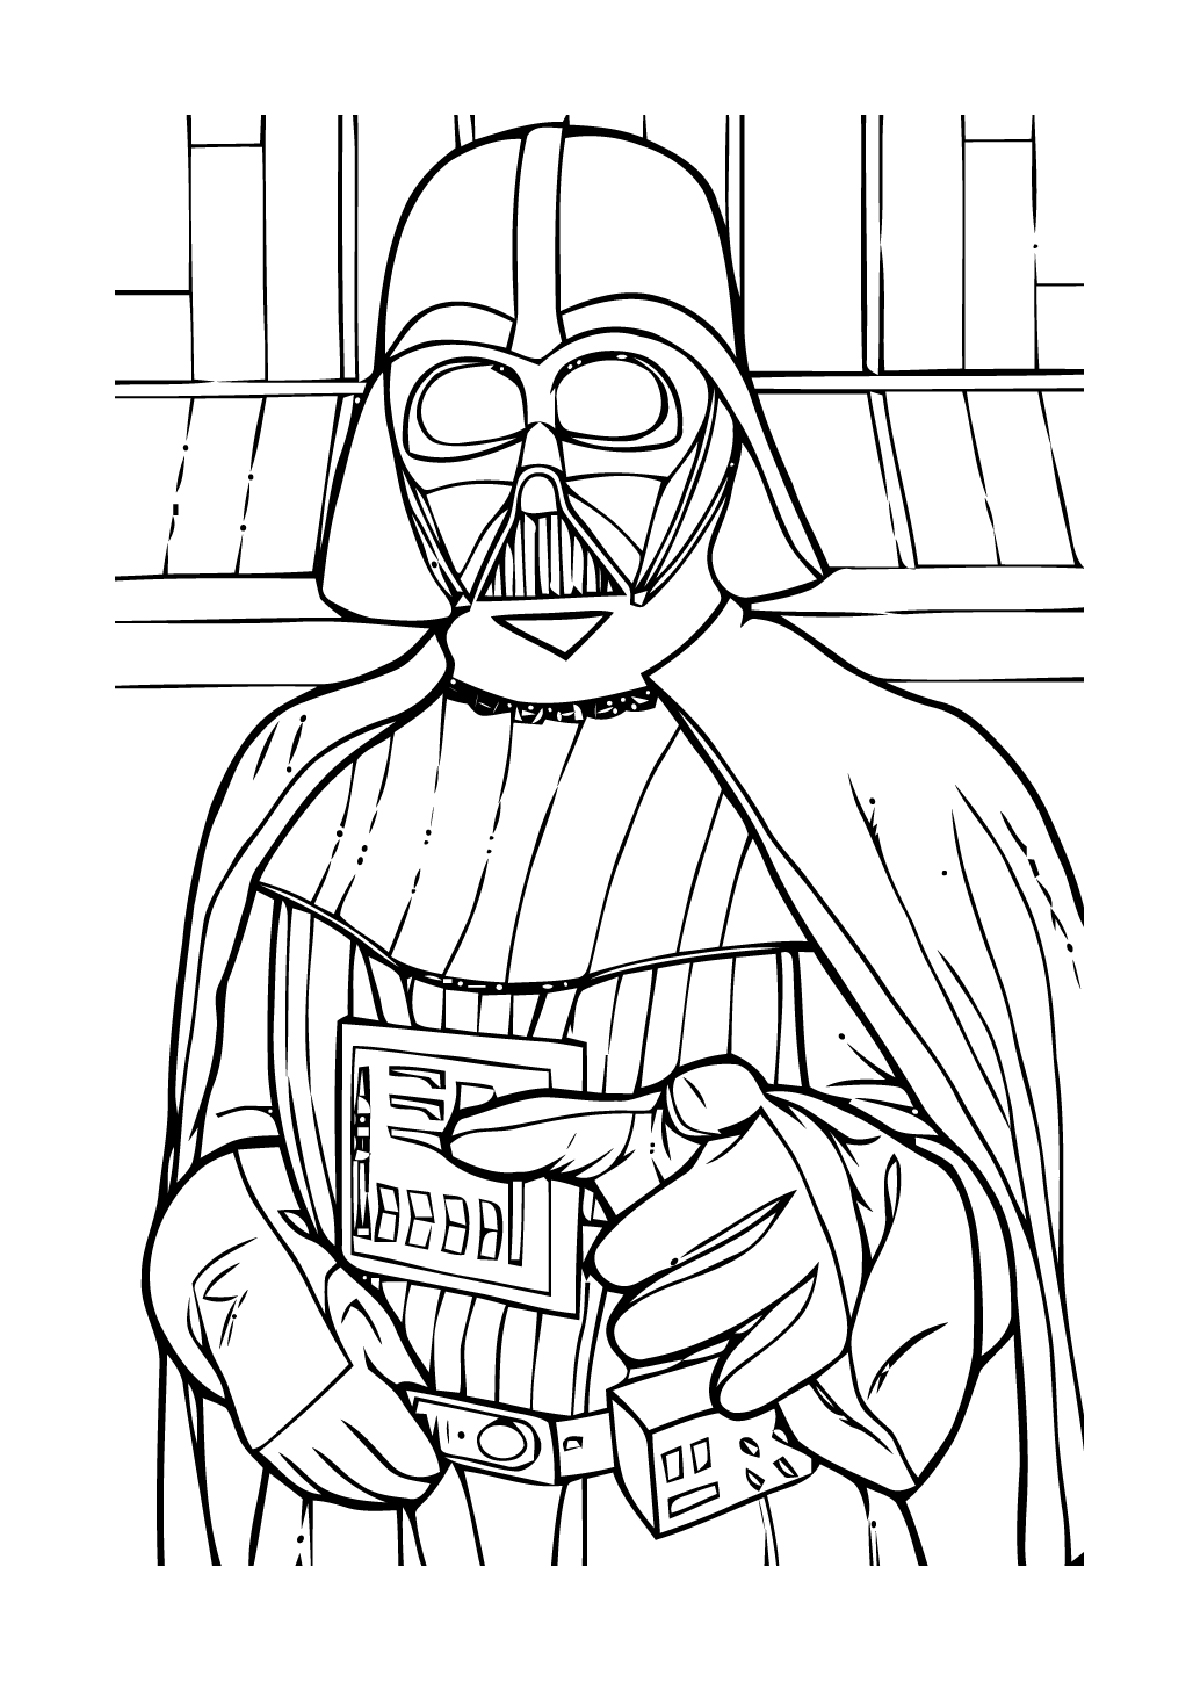 Star wars for children - Star Wars Kids Coloring Pages